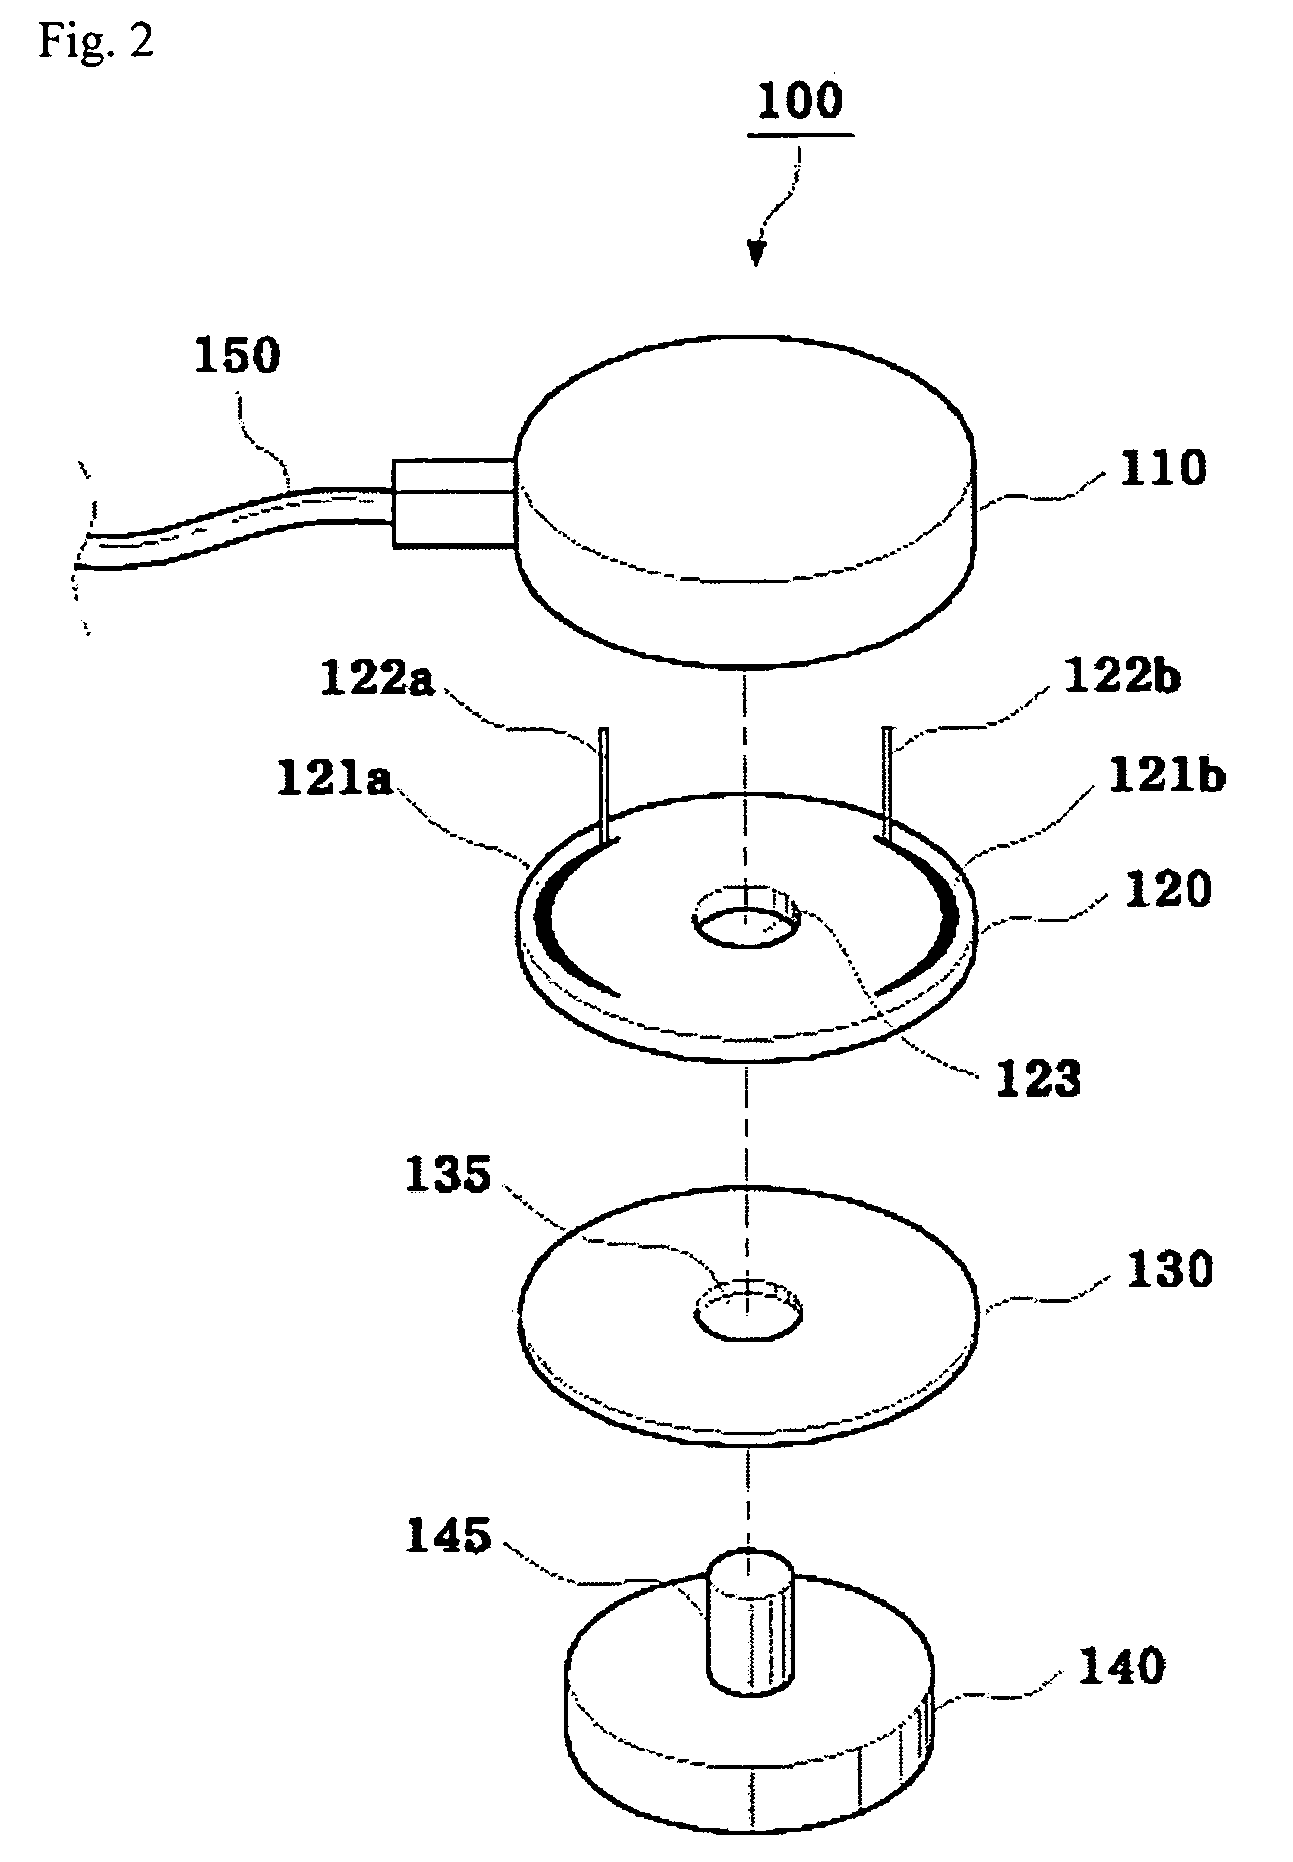 Physiological signal detection module, multi-channel connector module and physiological signal detection apparatus using the same